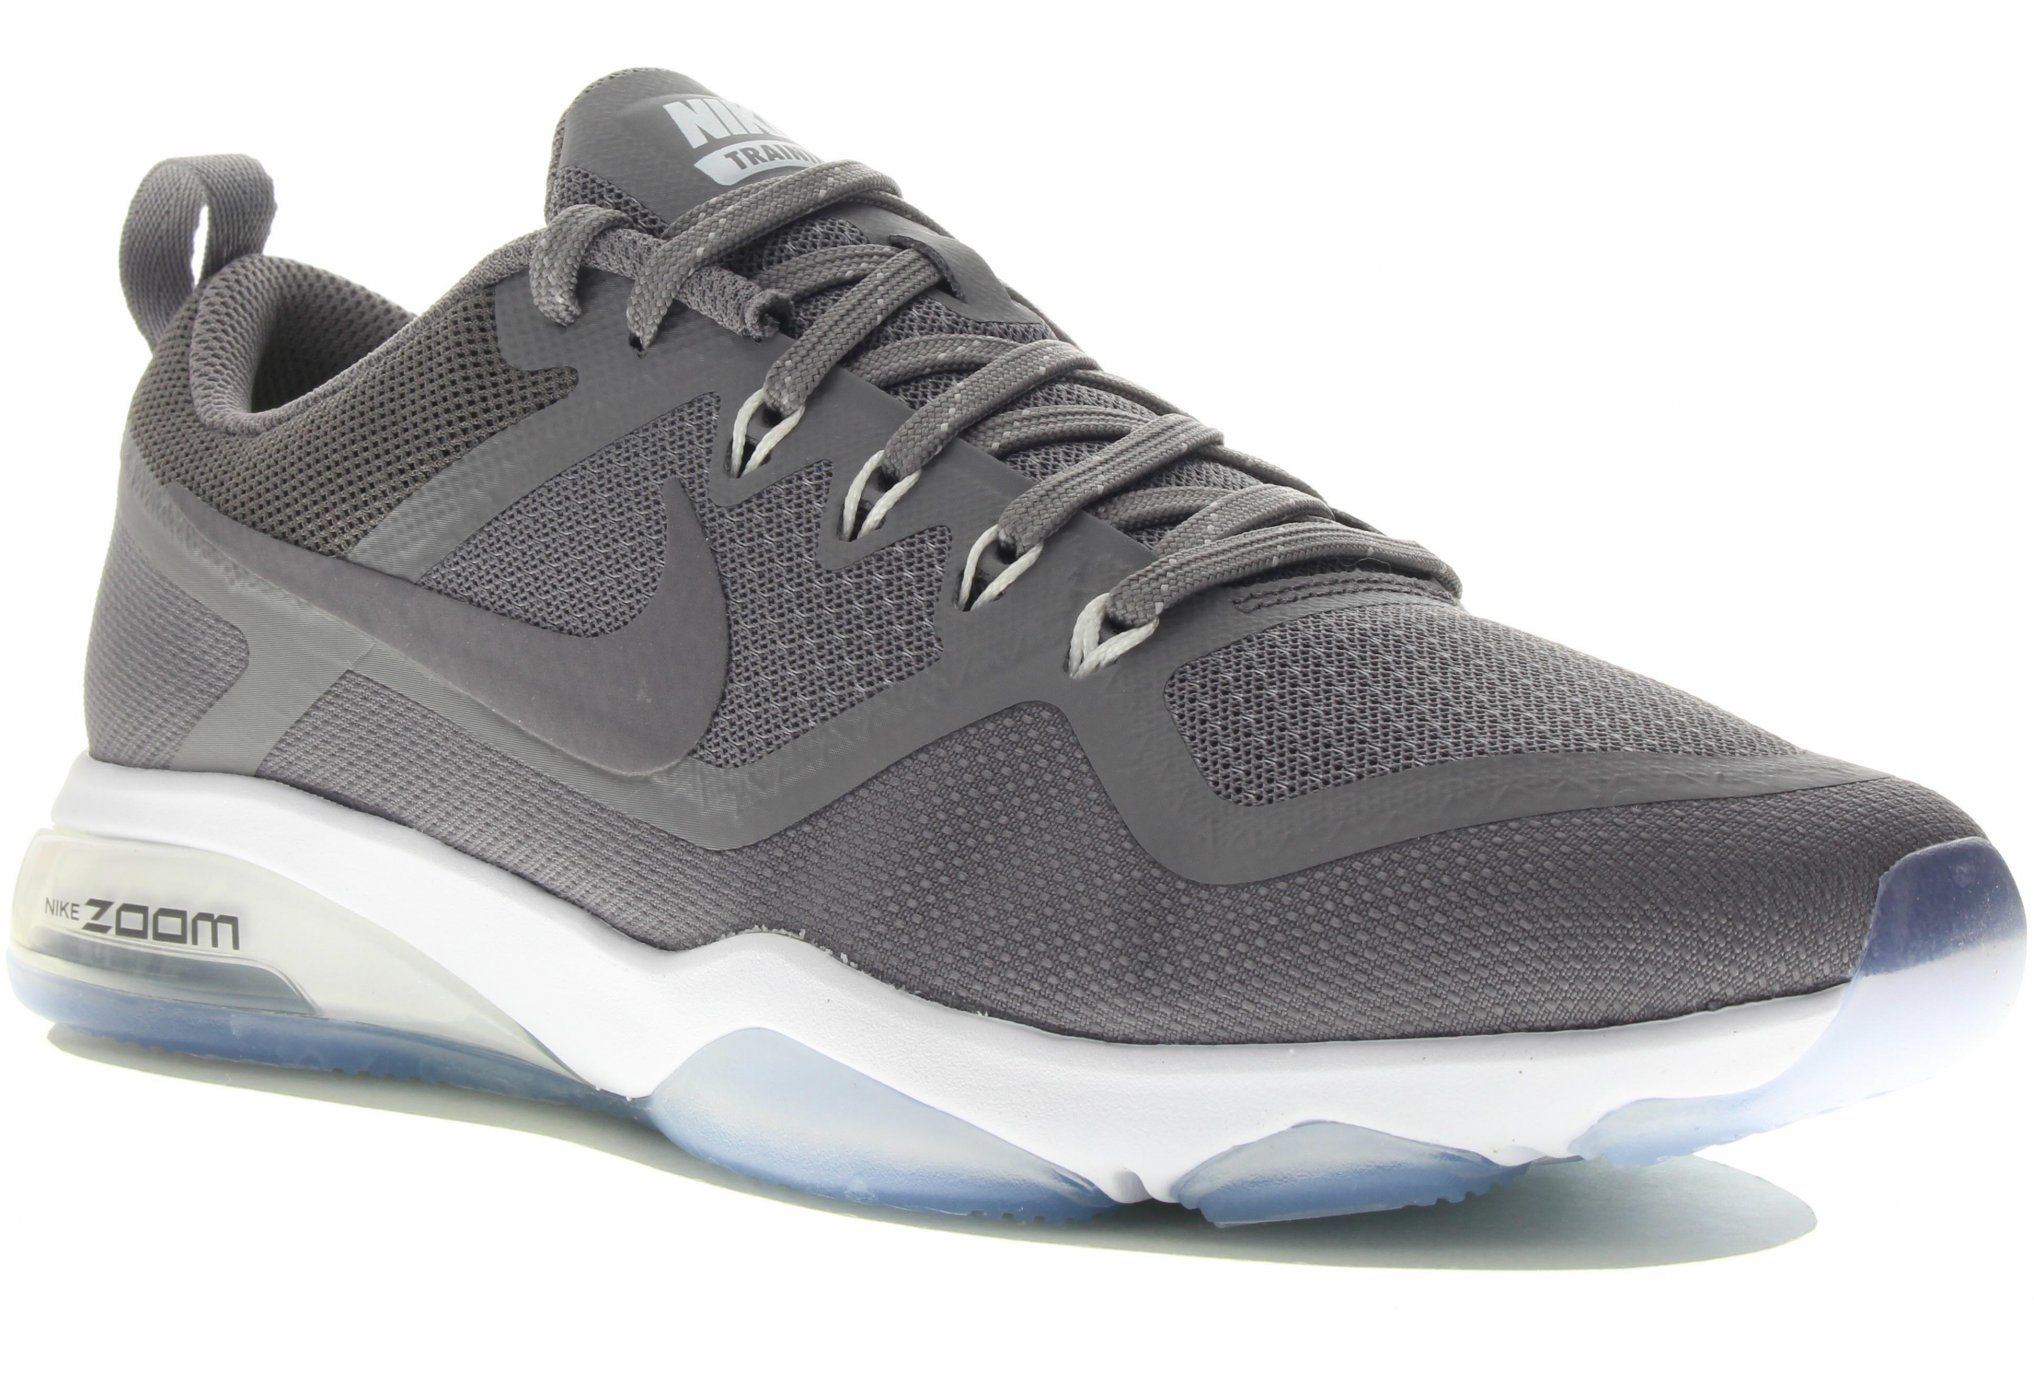 Nike Air zoom fitness w dittique chaussures femme